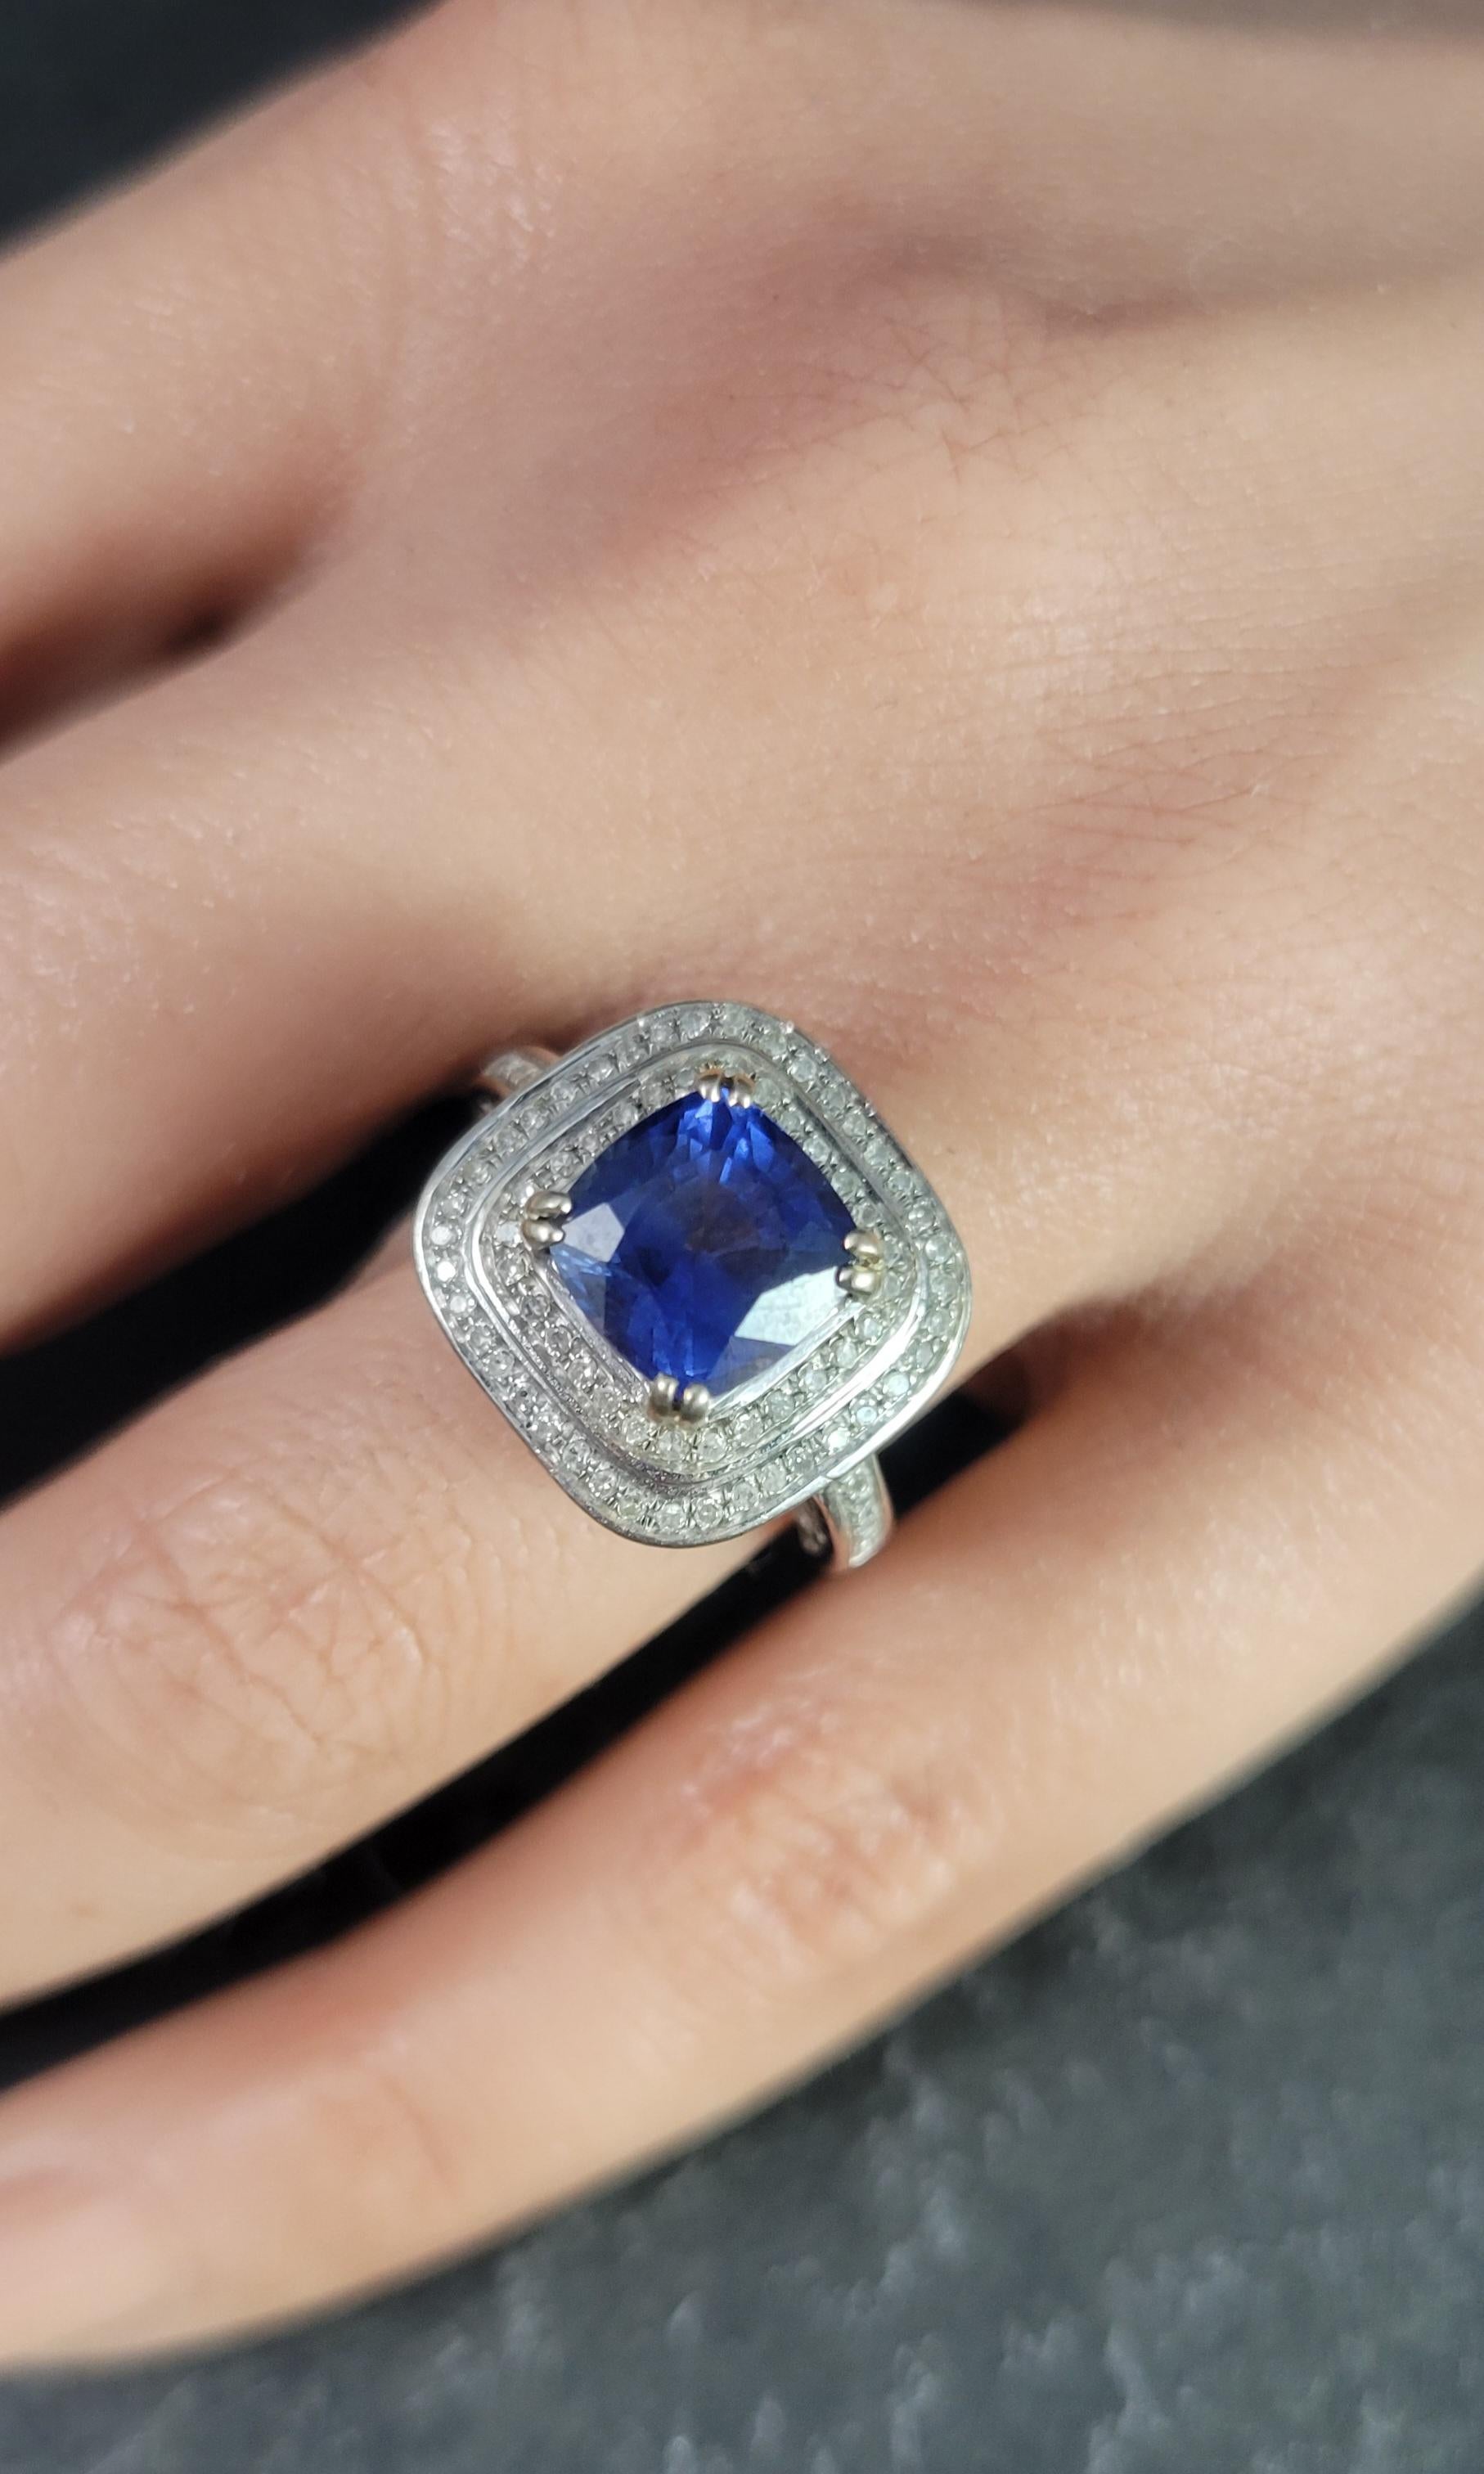 This high set sapphire and diamond ring is not only pleasing to the eye, it's also comfortable.

The gorgeous cushion cut sapphire is a 3 carat, vibrant blue with hints of purple. It measures 8x8 mm.
It is accented by apx 1 total carat weight of